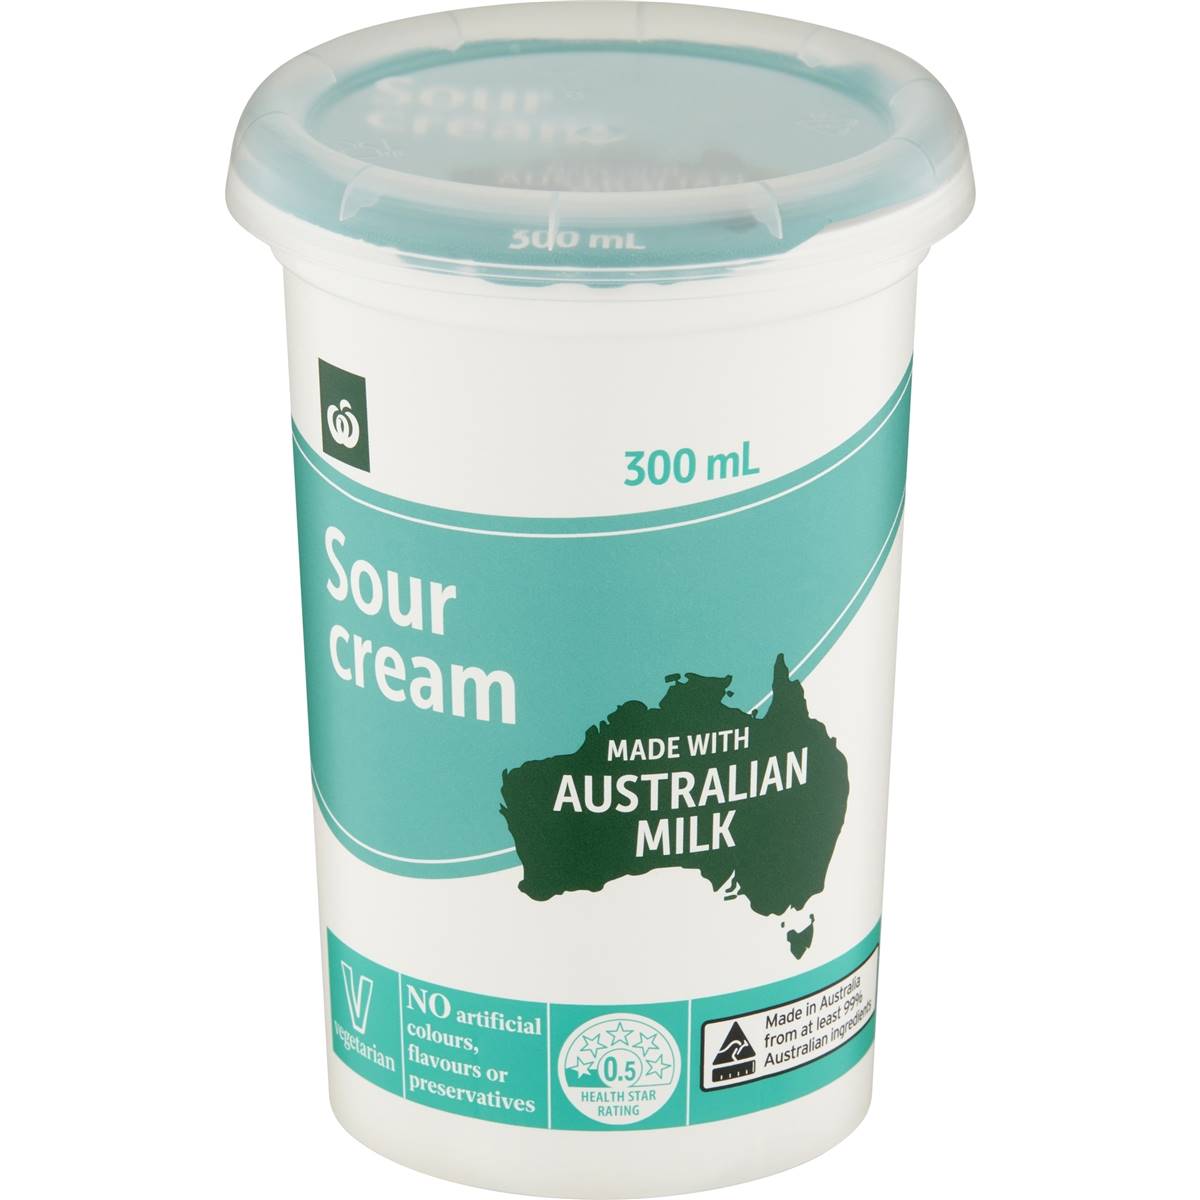 Calories in Woolworths Sour Cream